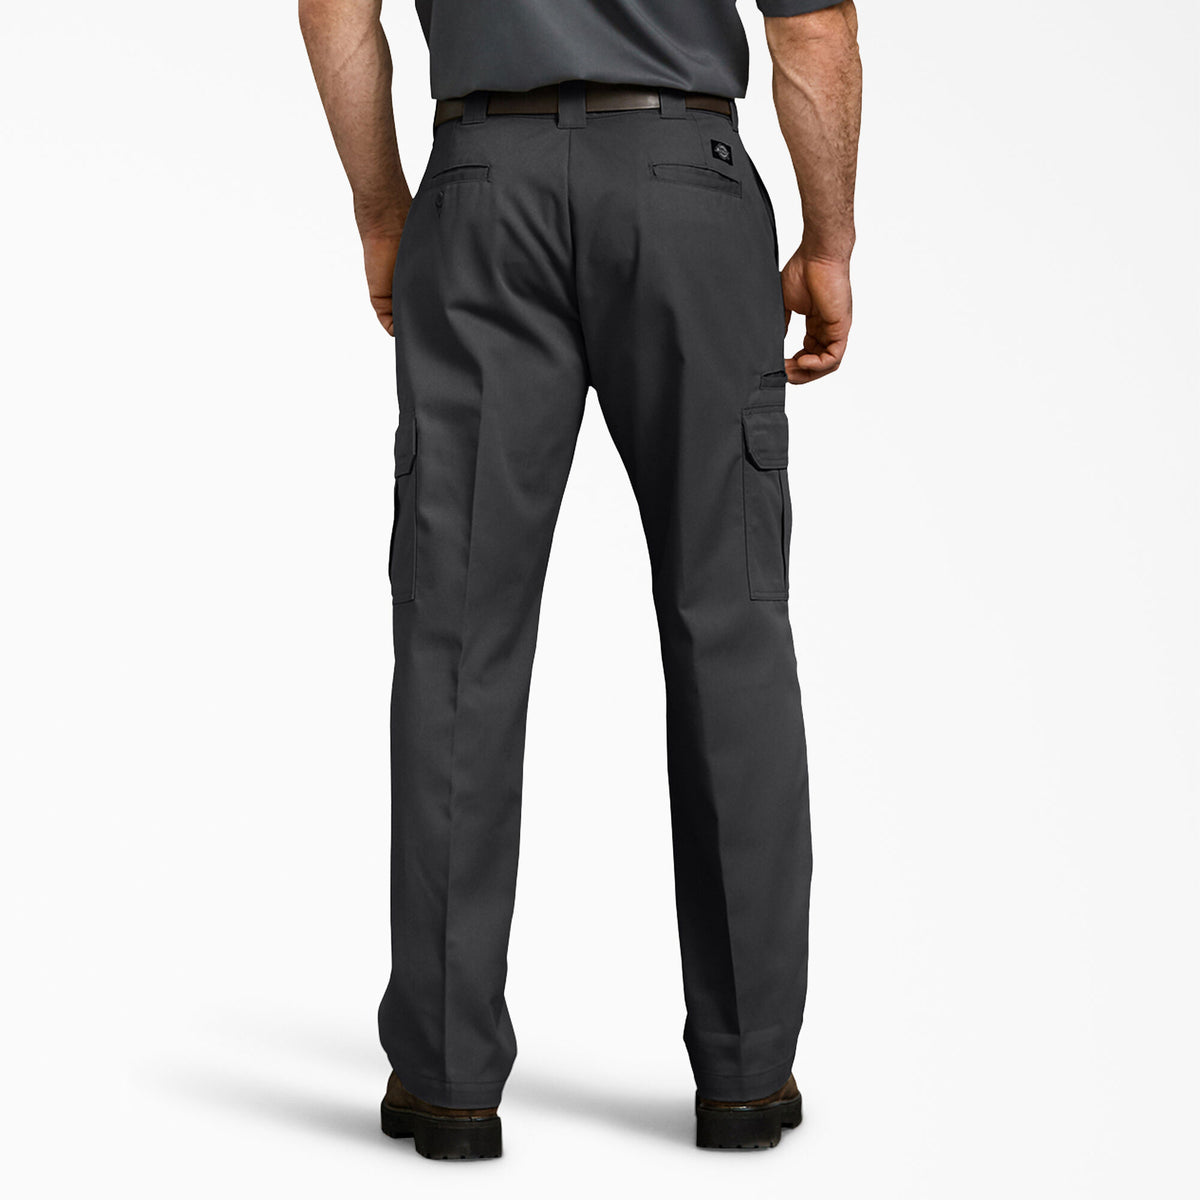 Dickies FLEX Relaxed Fit Cargo Pants - Black – Basics Clothing Store